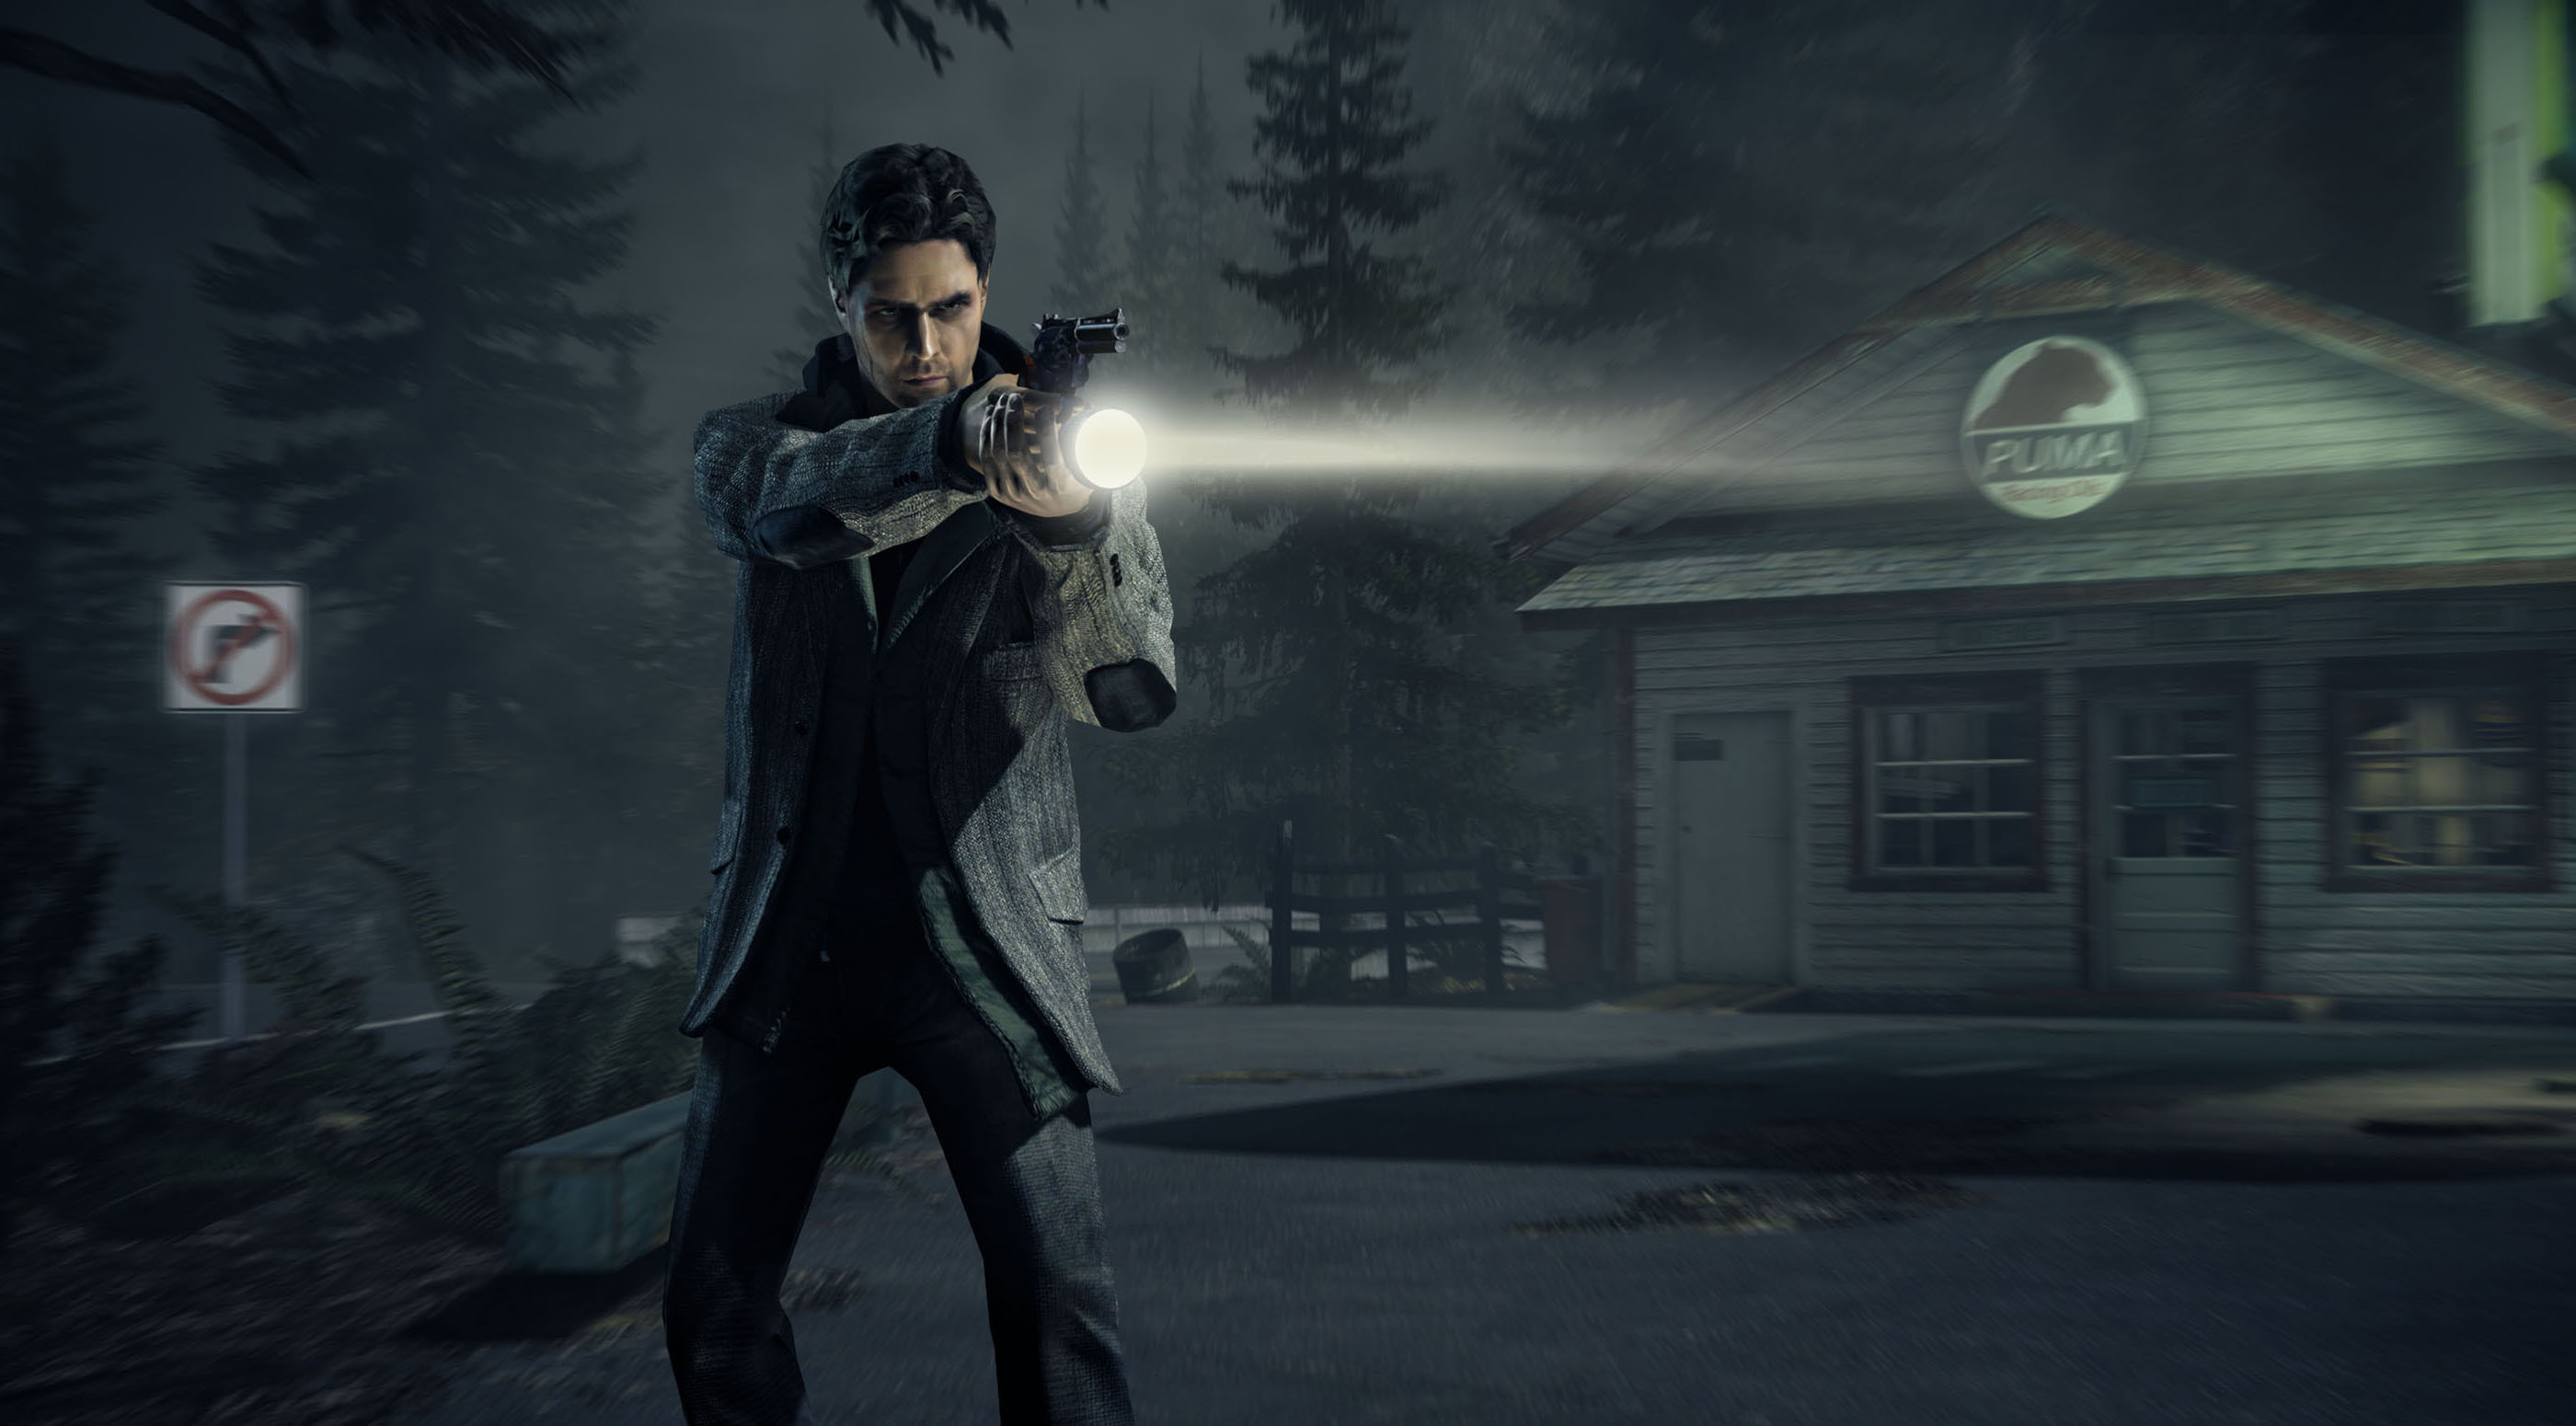 Alan Wake Gets a Live-Action TV Show